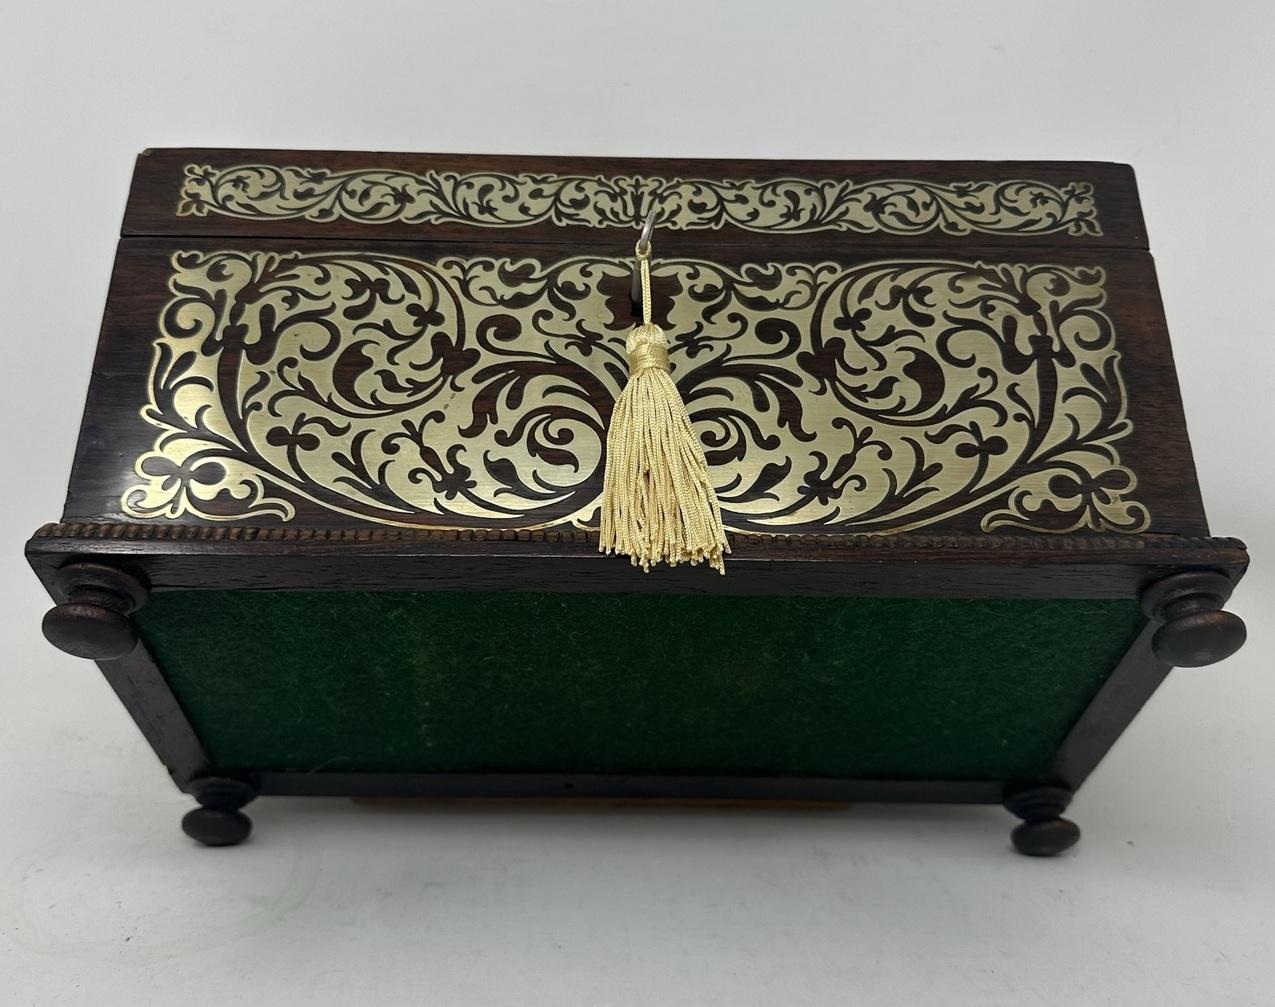 Antique Brass Inlaid Mahogany English Tea Caddy Box Regency Gillows Lancaster For Sale 6